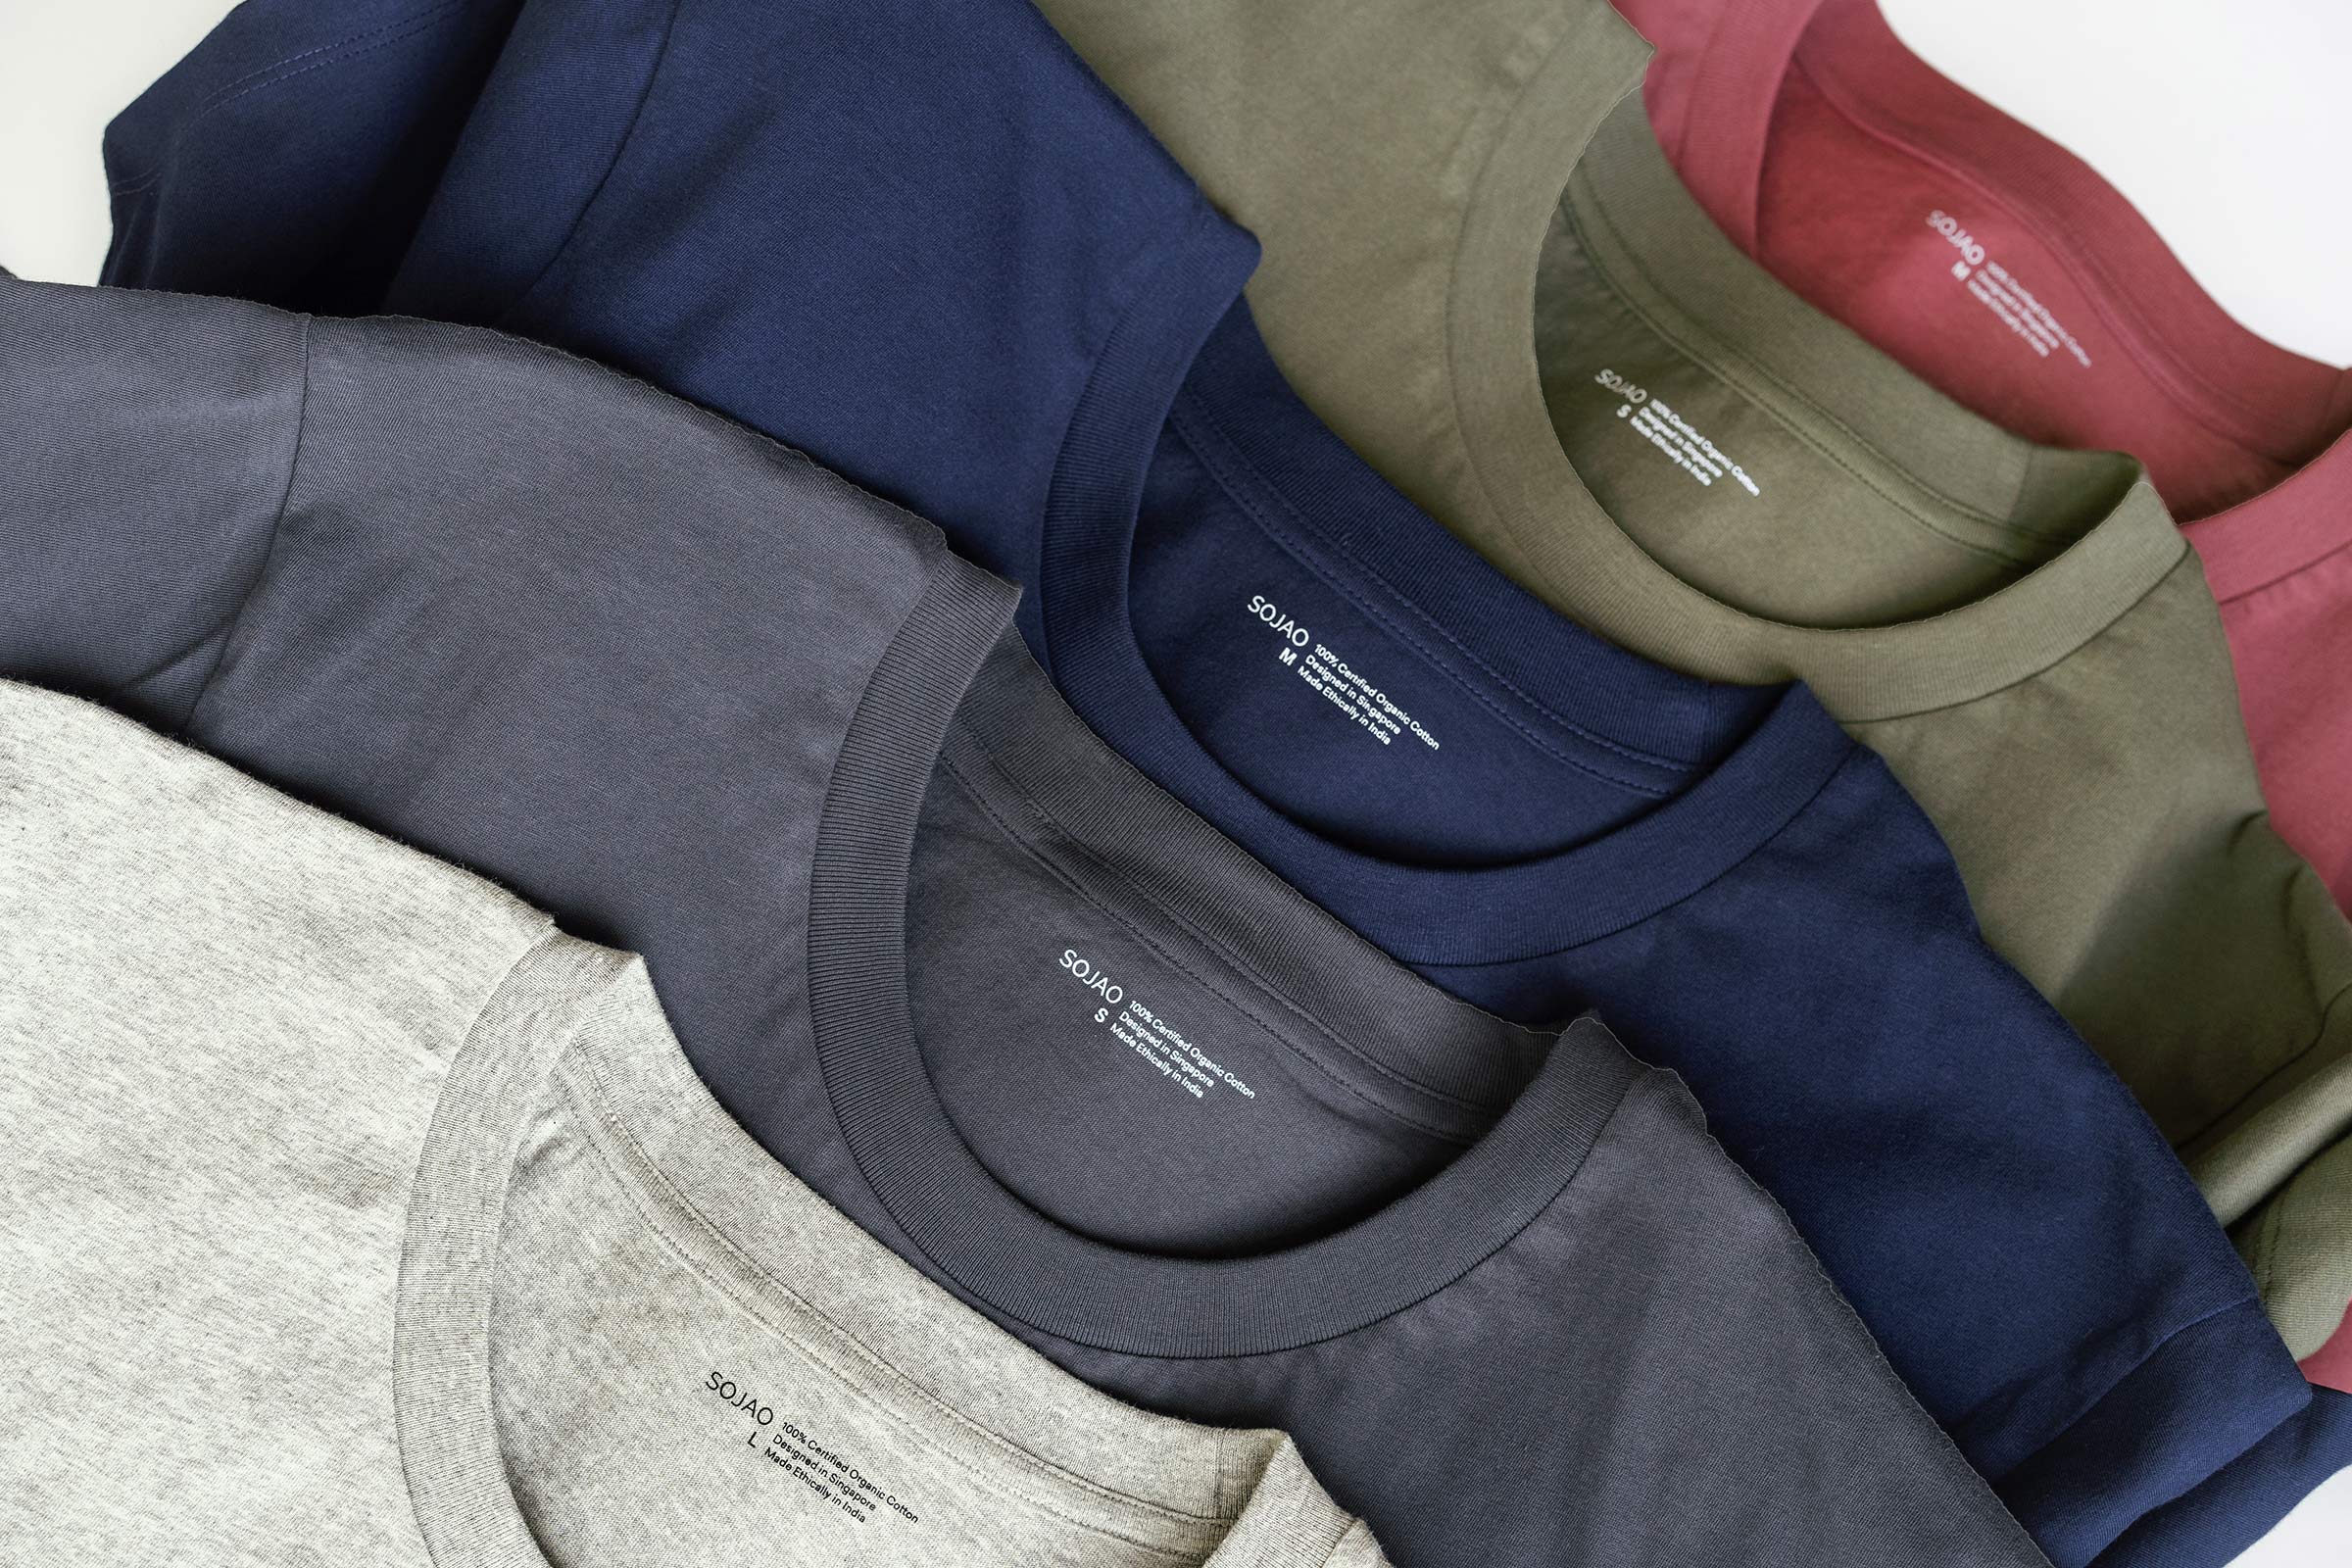 pebbles-midnight-navy-olive-rouge-organic-cotton-womens-tee-bundle-close-up-shot-by-sojao.jpg